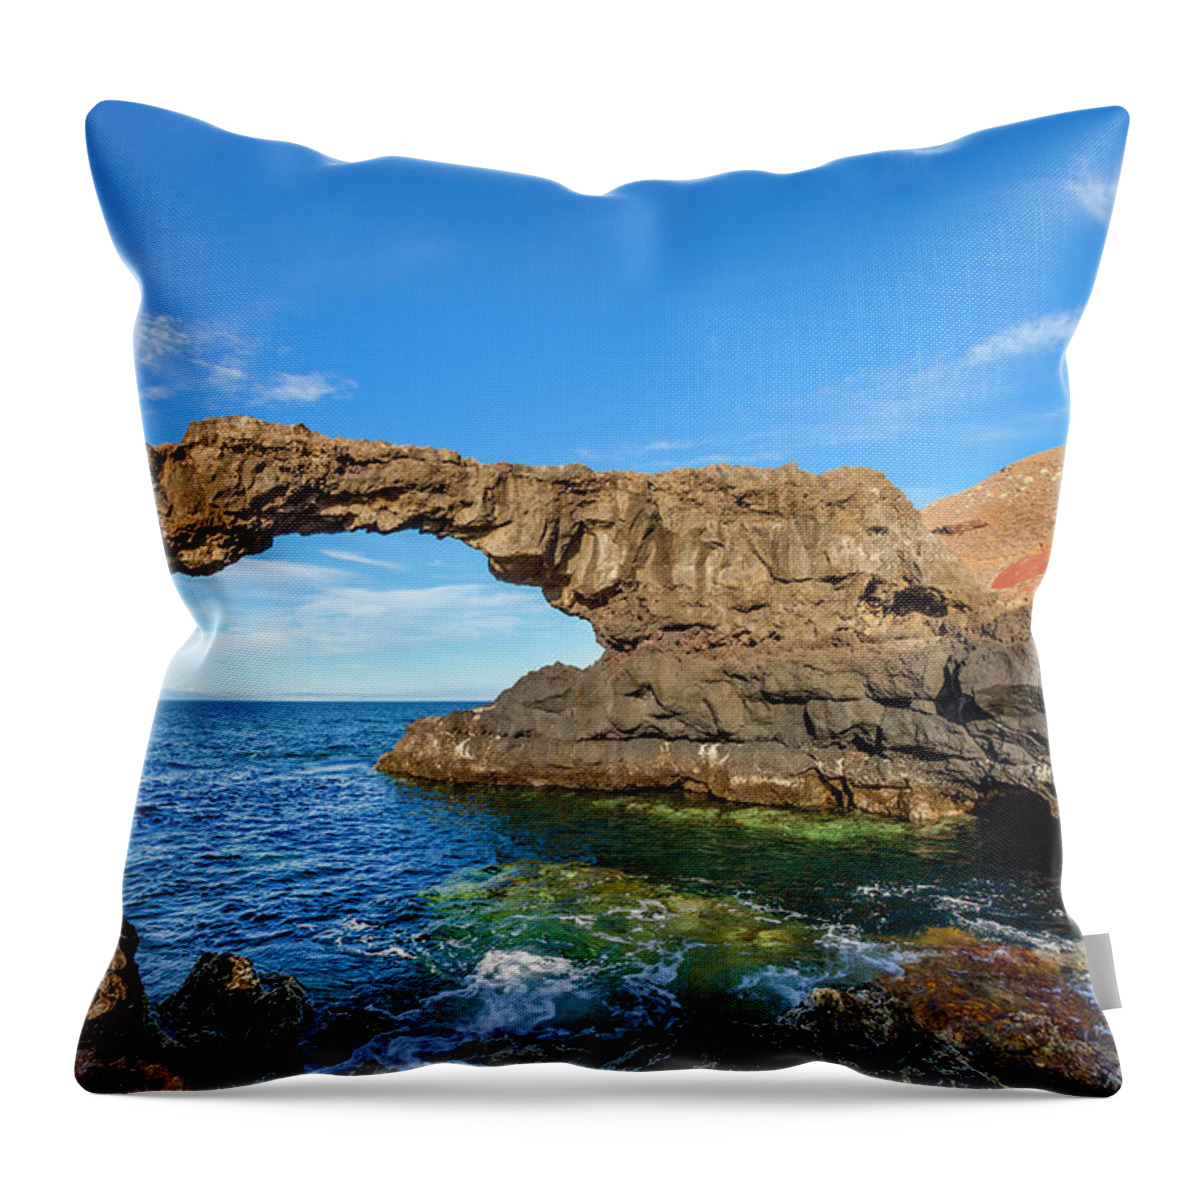 Extreme Terrain Throw Pillow featuring the photograph Natural Stone Arch Charco Manso, El by Flavio Vallenari